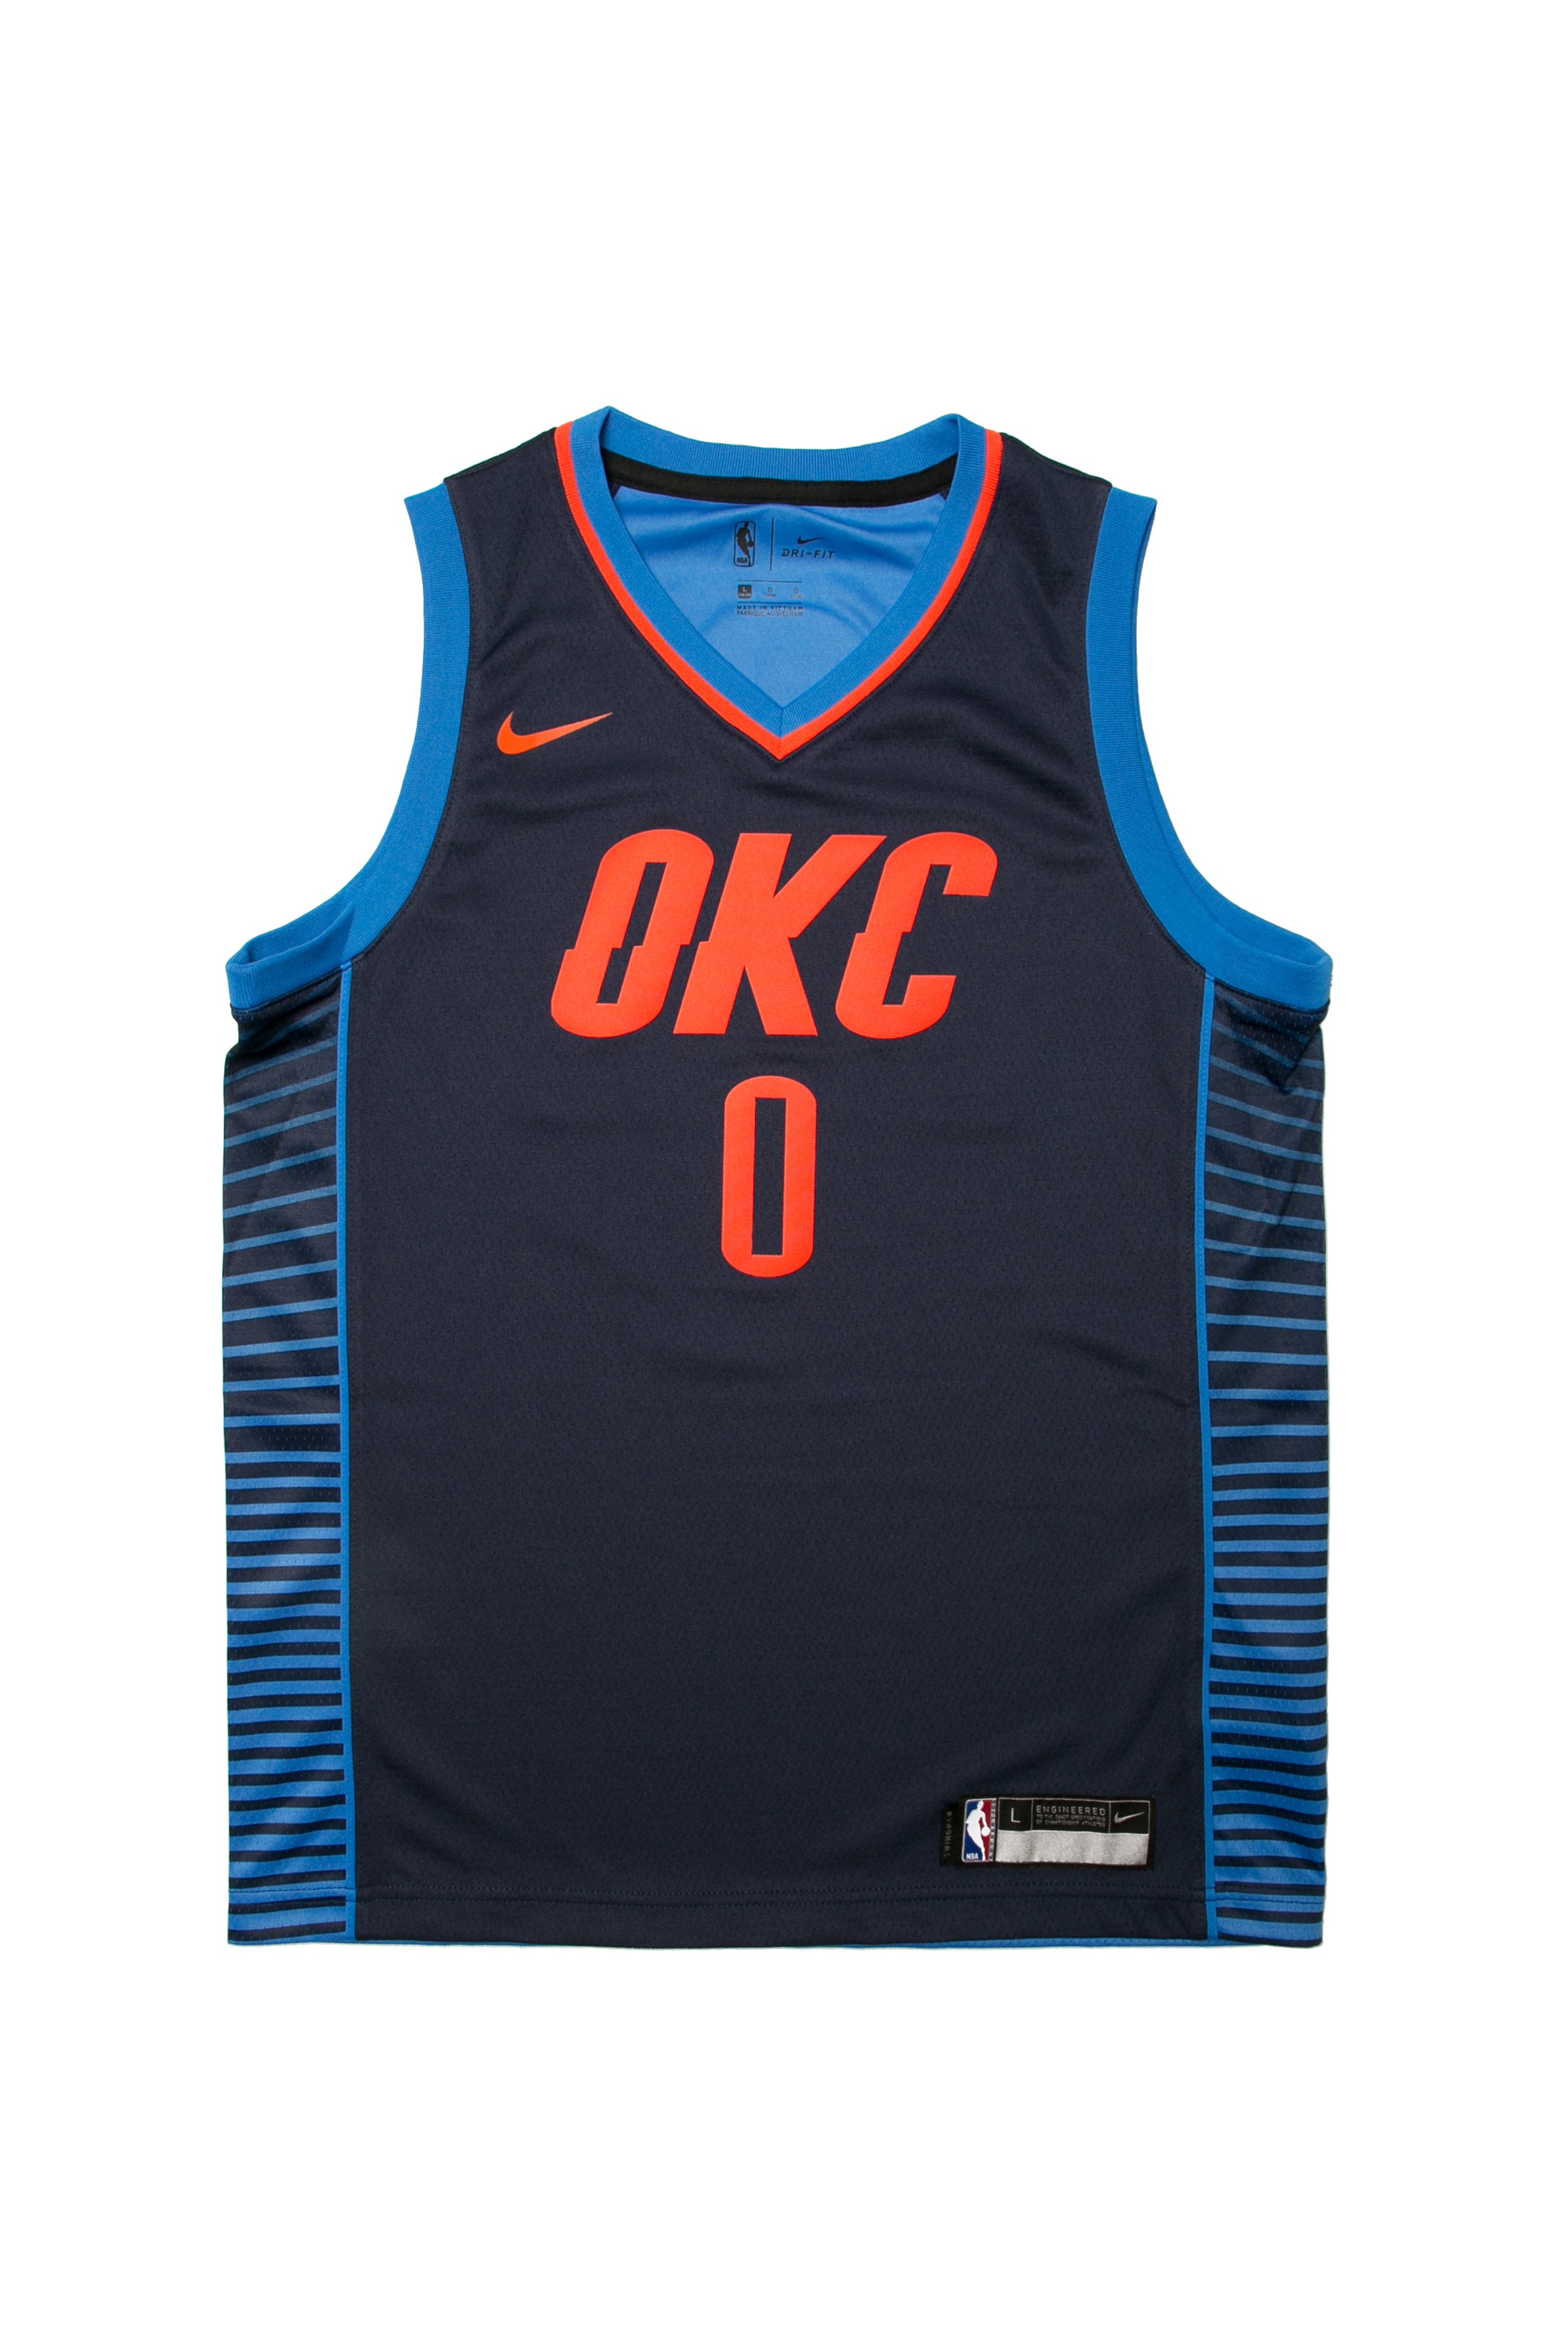 russell westbrook jersey navy